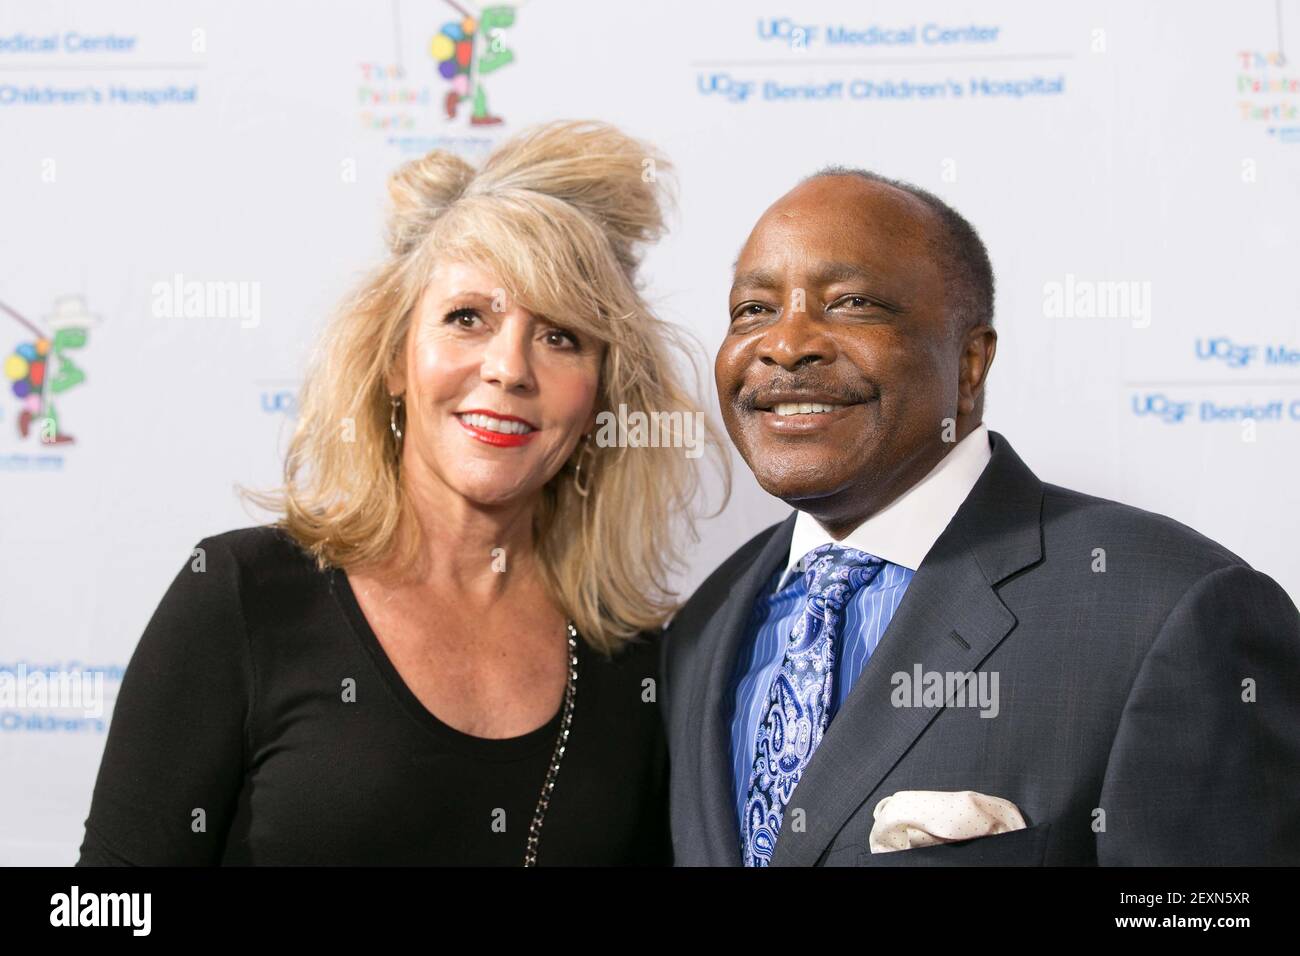 Theresa Morgan, Joe Morgan at the A Starry Evening of Music, Comedy and  Surprises event at the Davies Symphony Hall in San Francisco, CA, on March  10, 2014. (Photo by Drew Altizer/Sipa